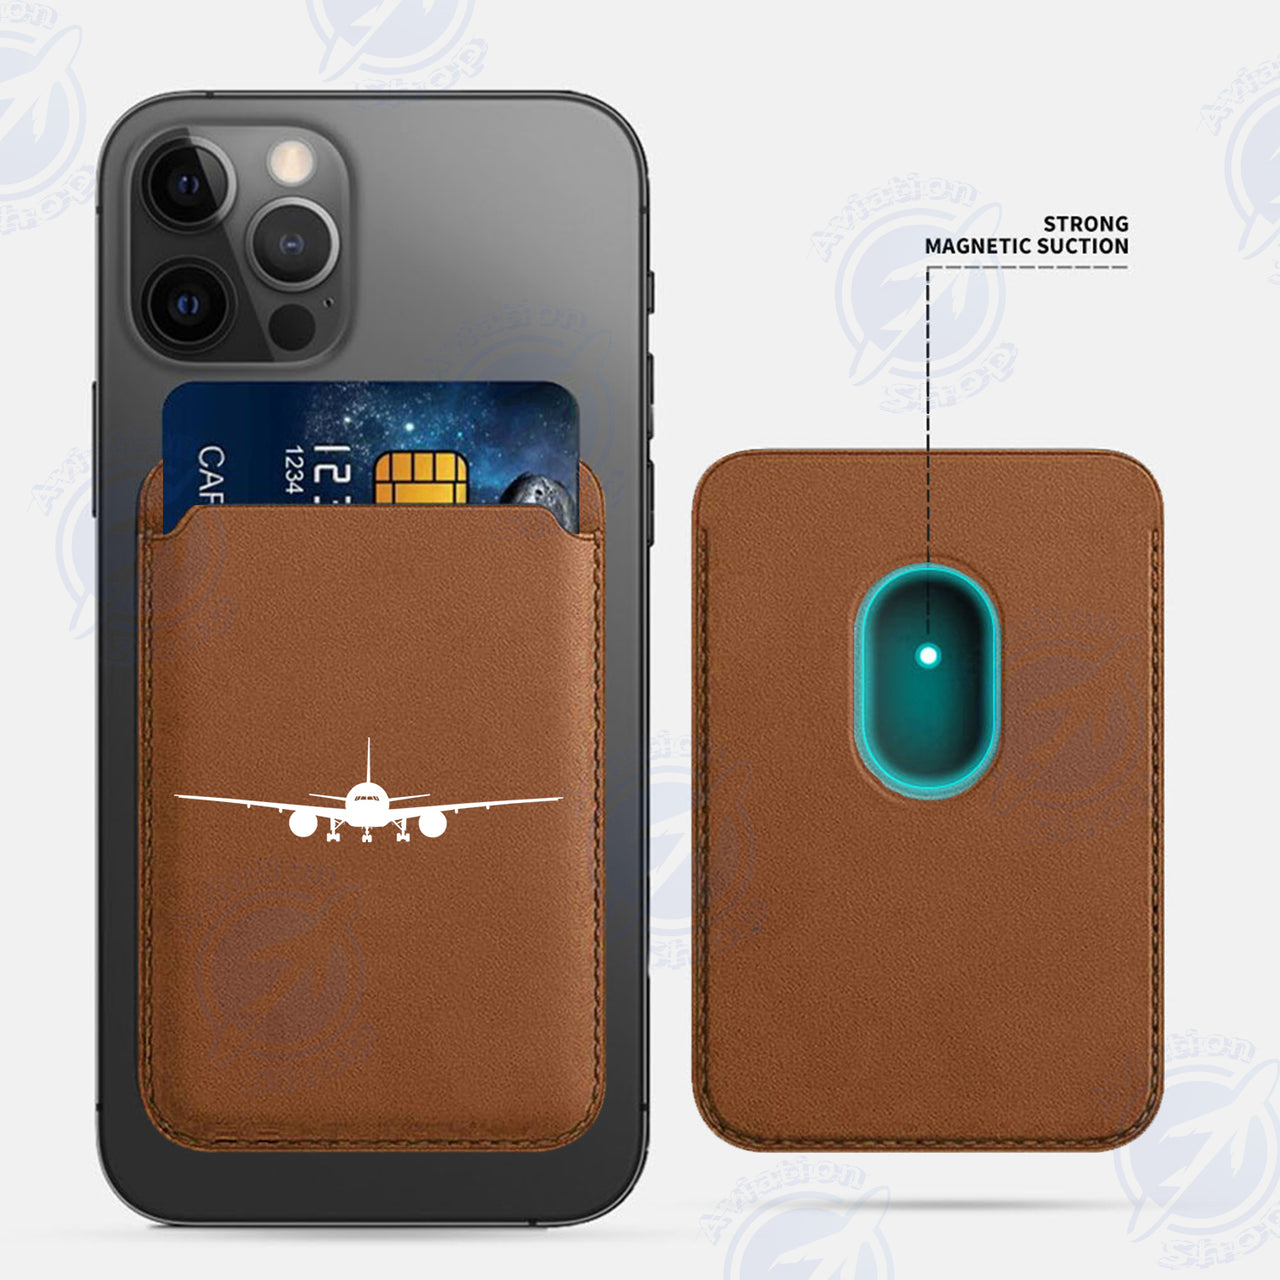 Boeing 777 Silhouette iPhone Cases Magnetic Card Wallet